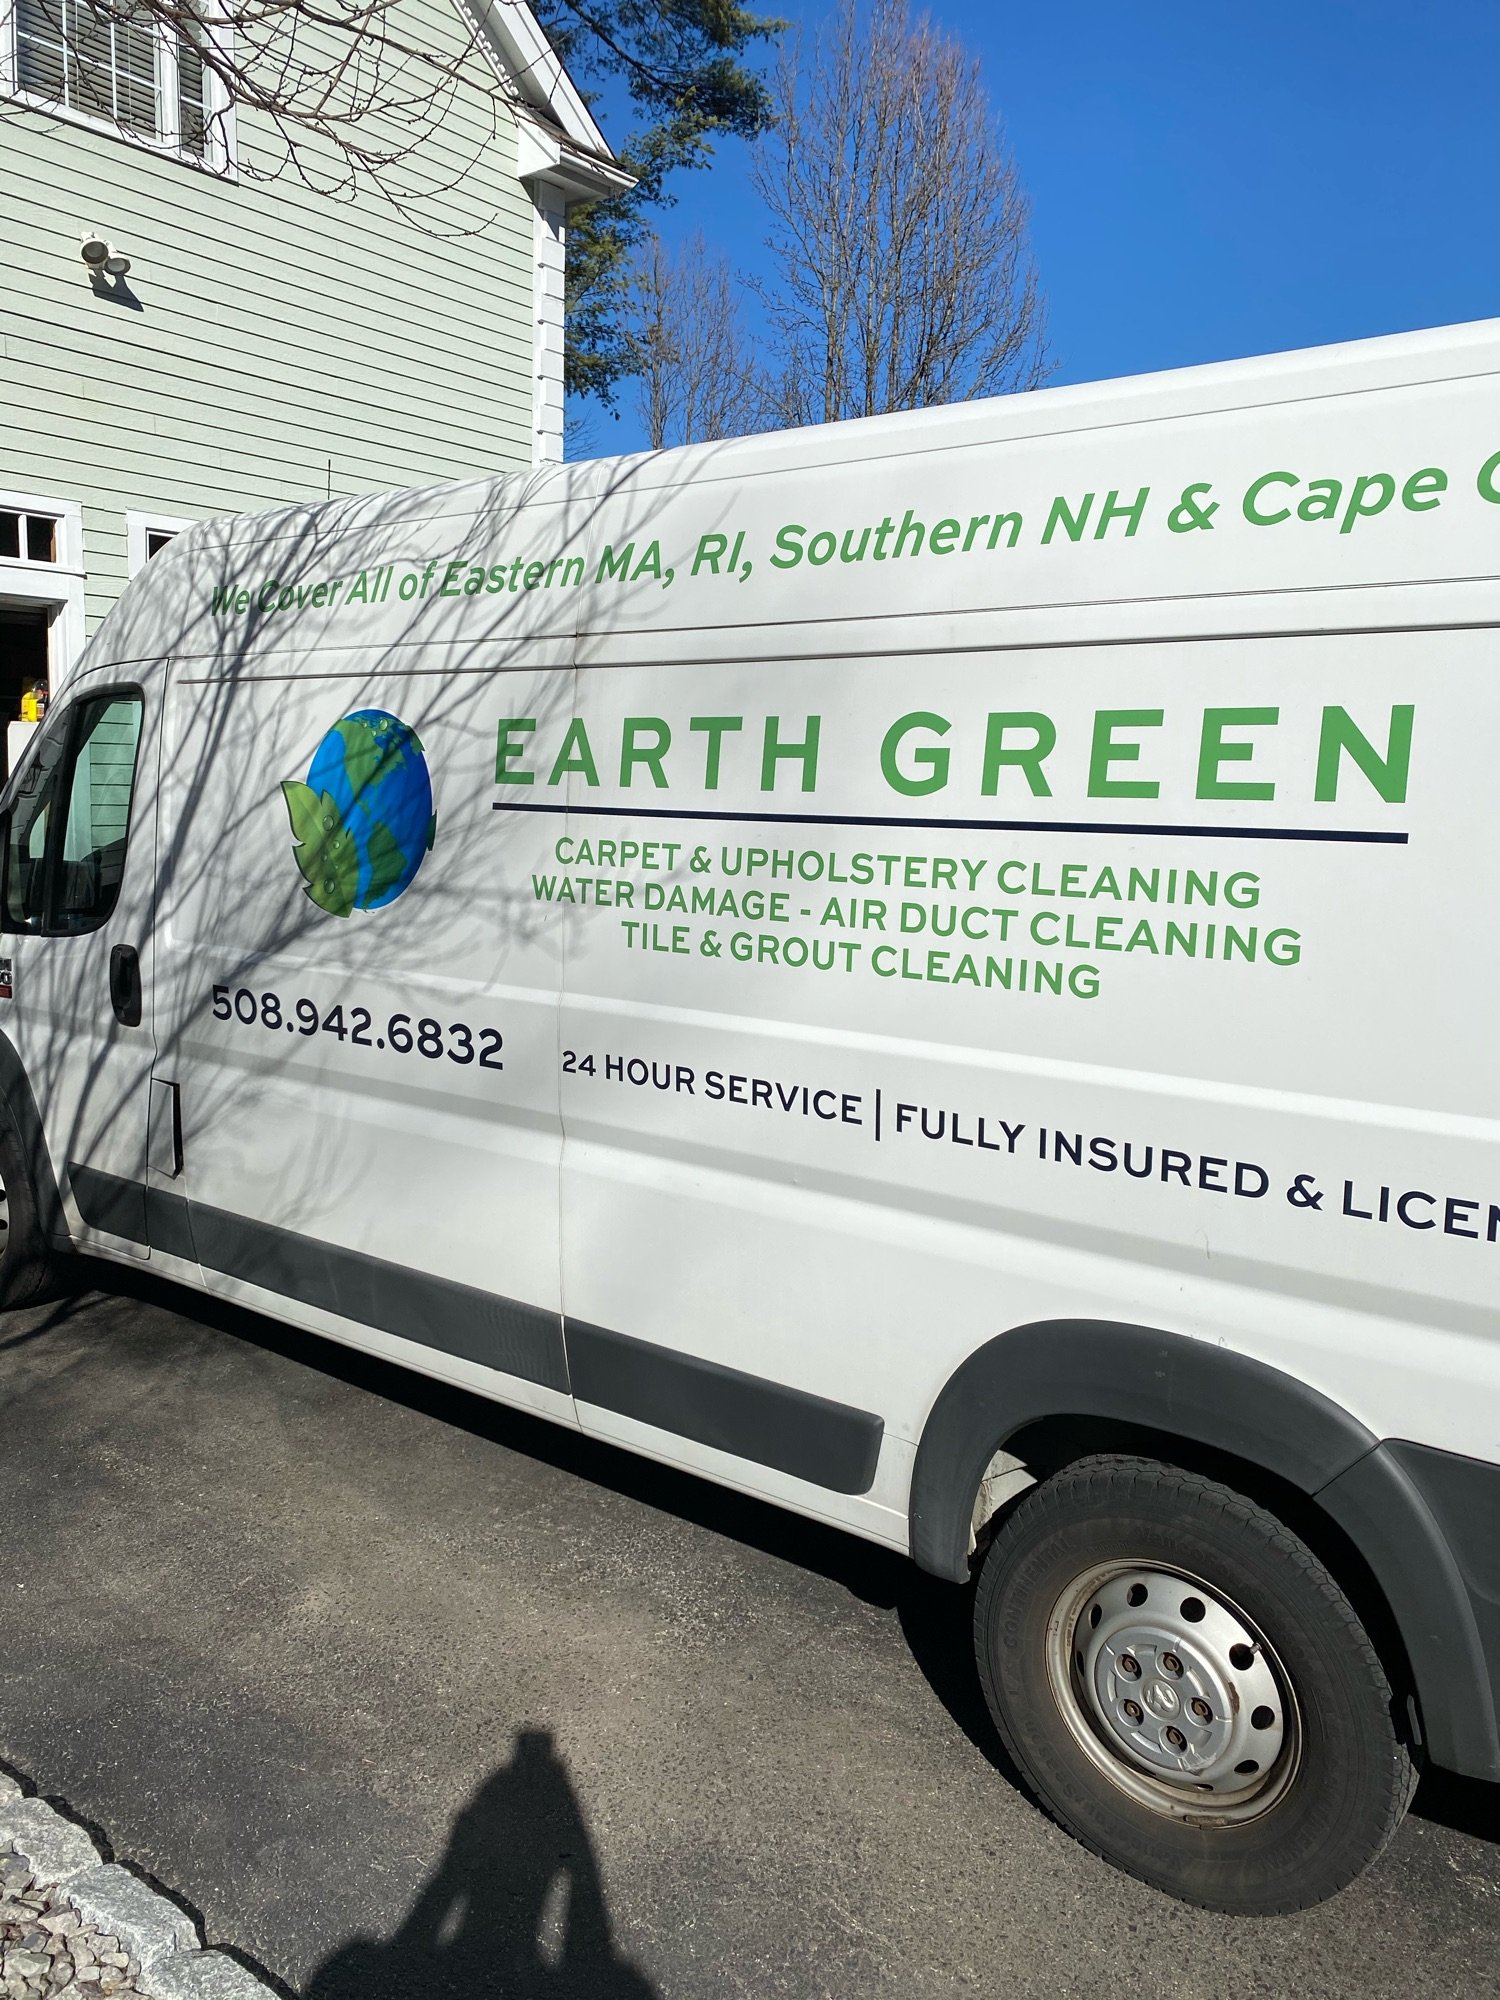 Earth Green Dryer Vent & Duct Cleaning Logo